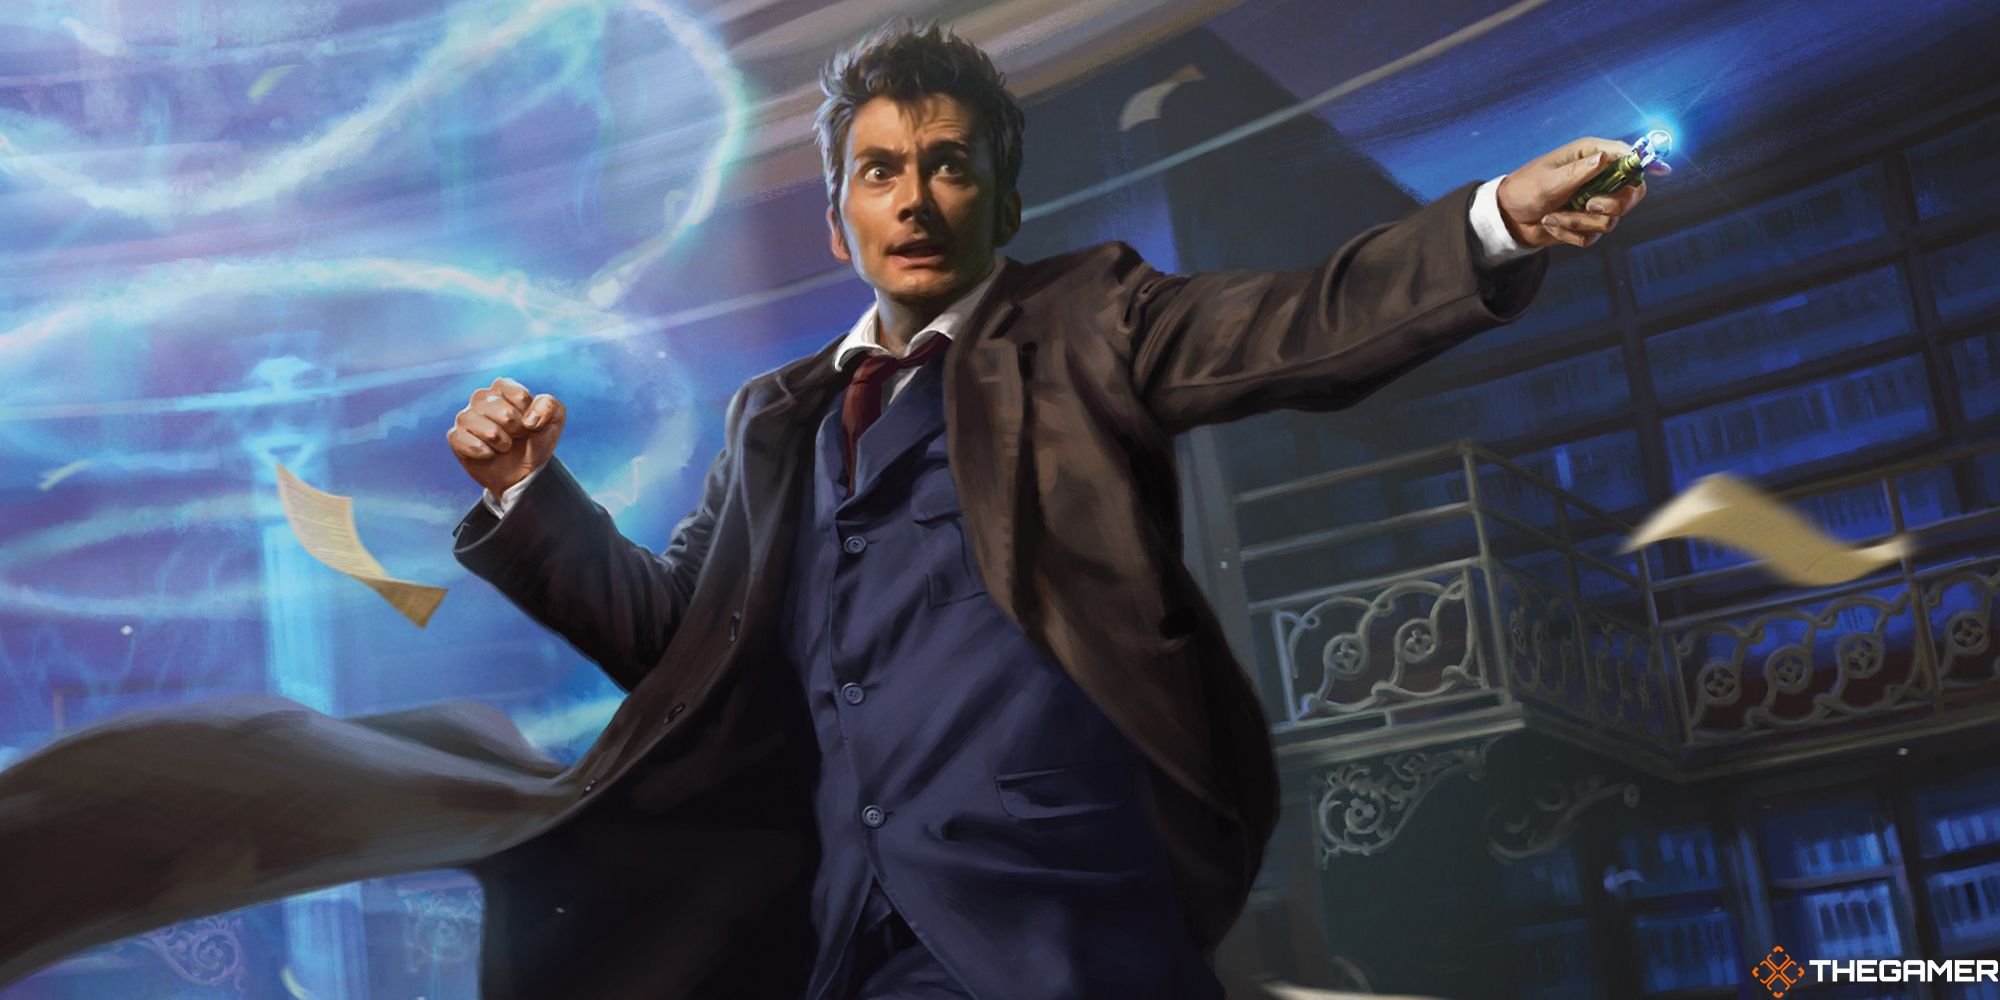 The Tenth Doctor From Doctor Who in MTG